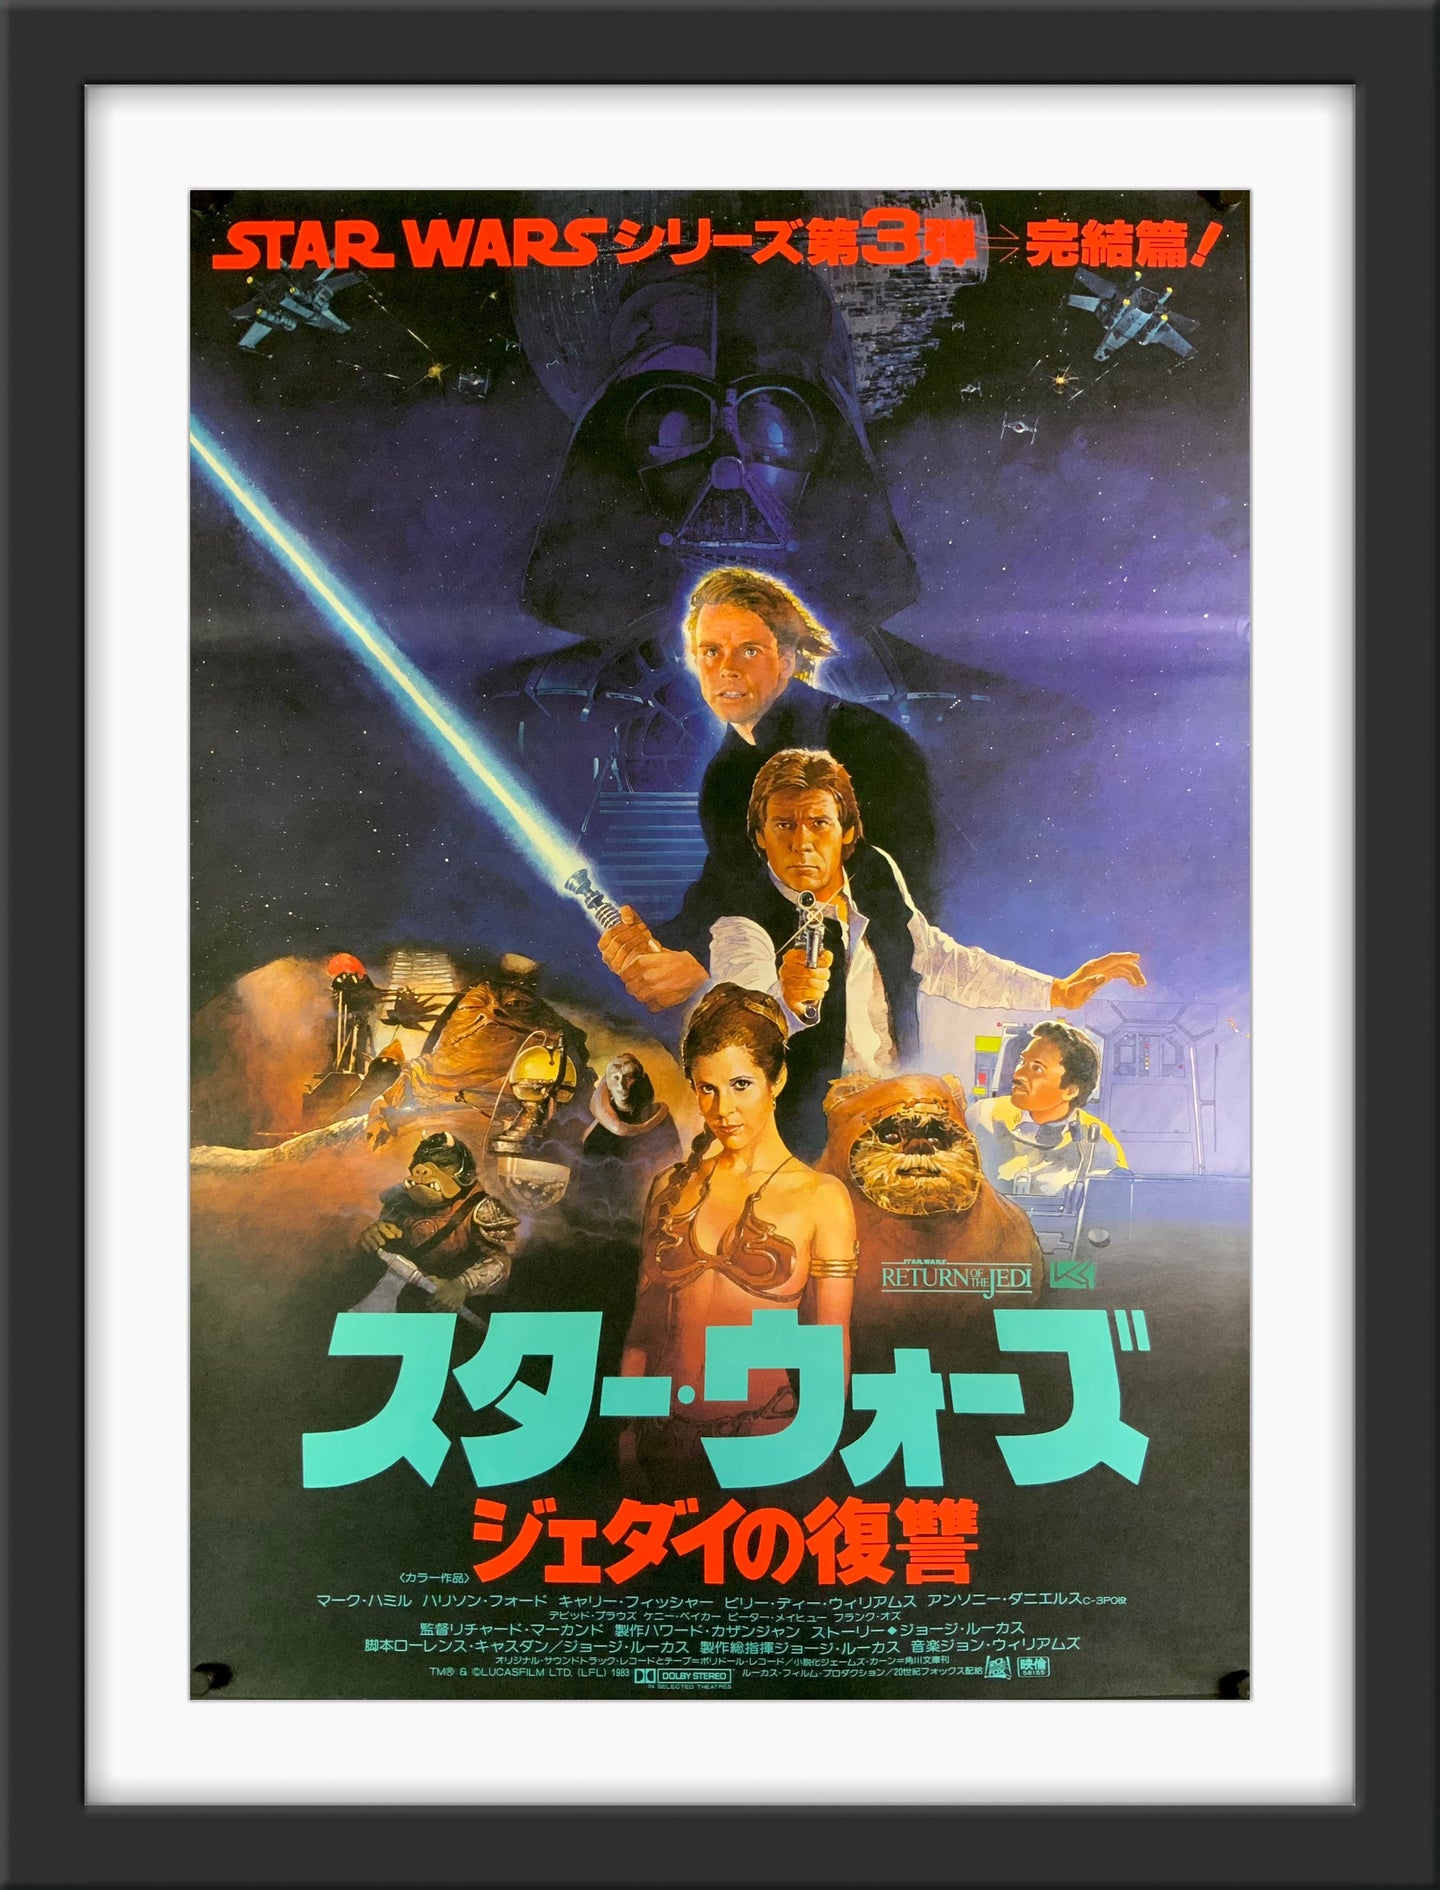 An original Japanese B2 movie poster with artwork by Kazuhiko Sano for the Star Wars film The Return of the JEdi